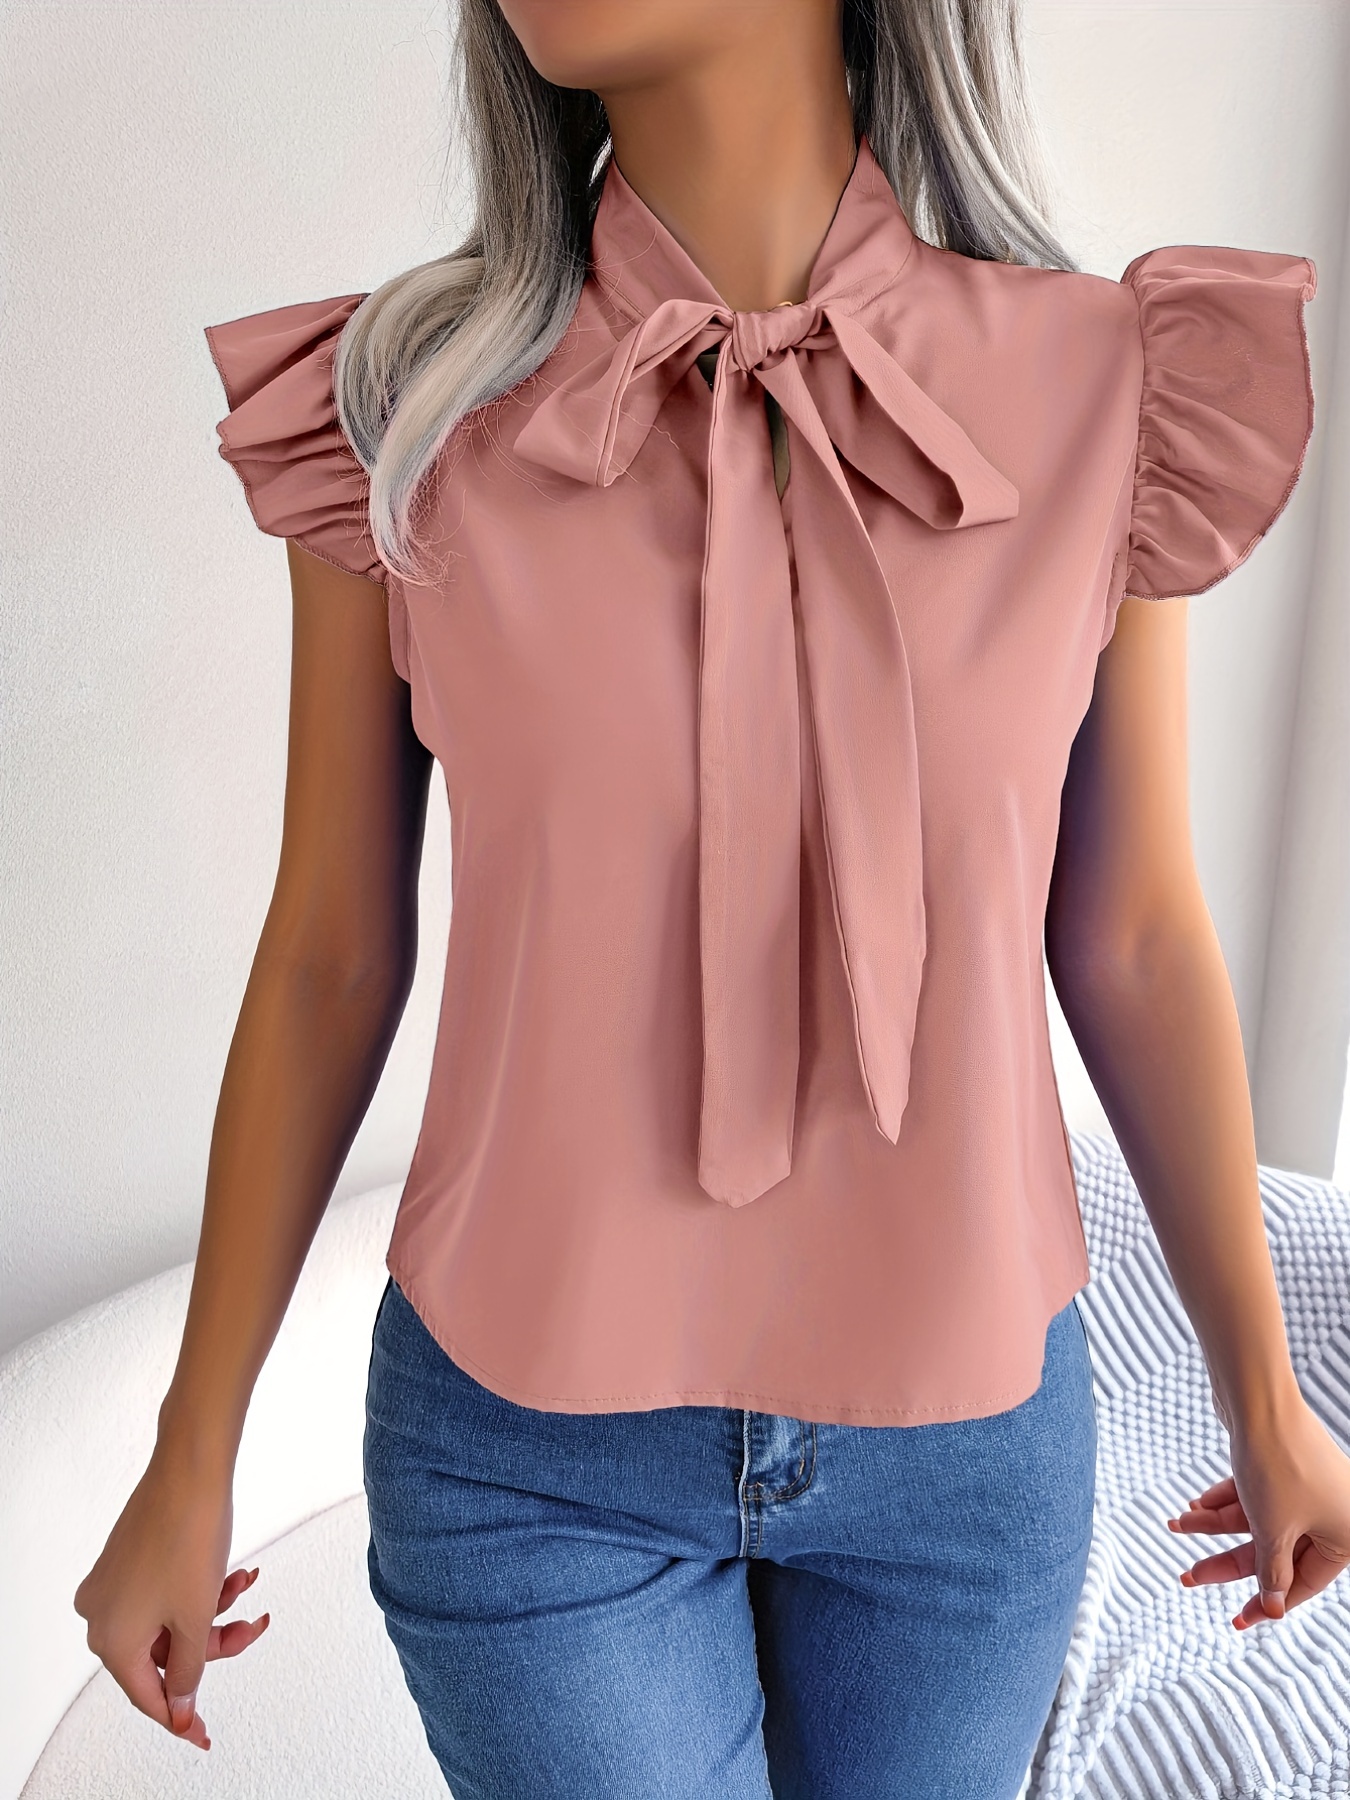 Women Front Frilly Bow Tie Ruffle Solid Chiffon Blouse Long Sleeve